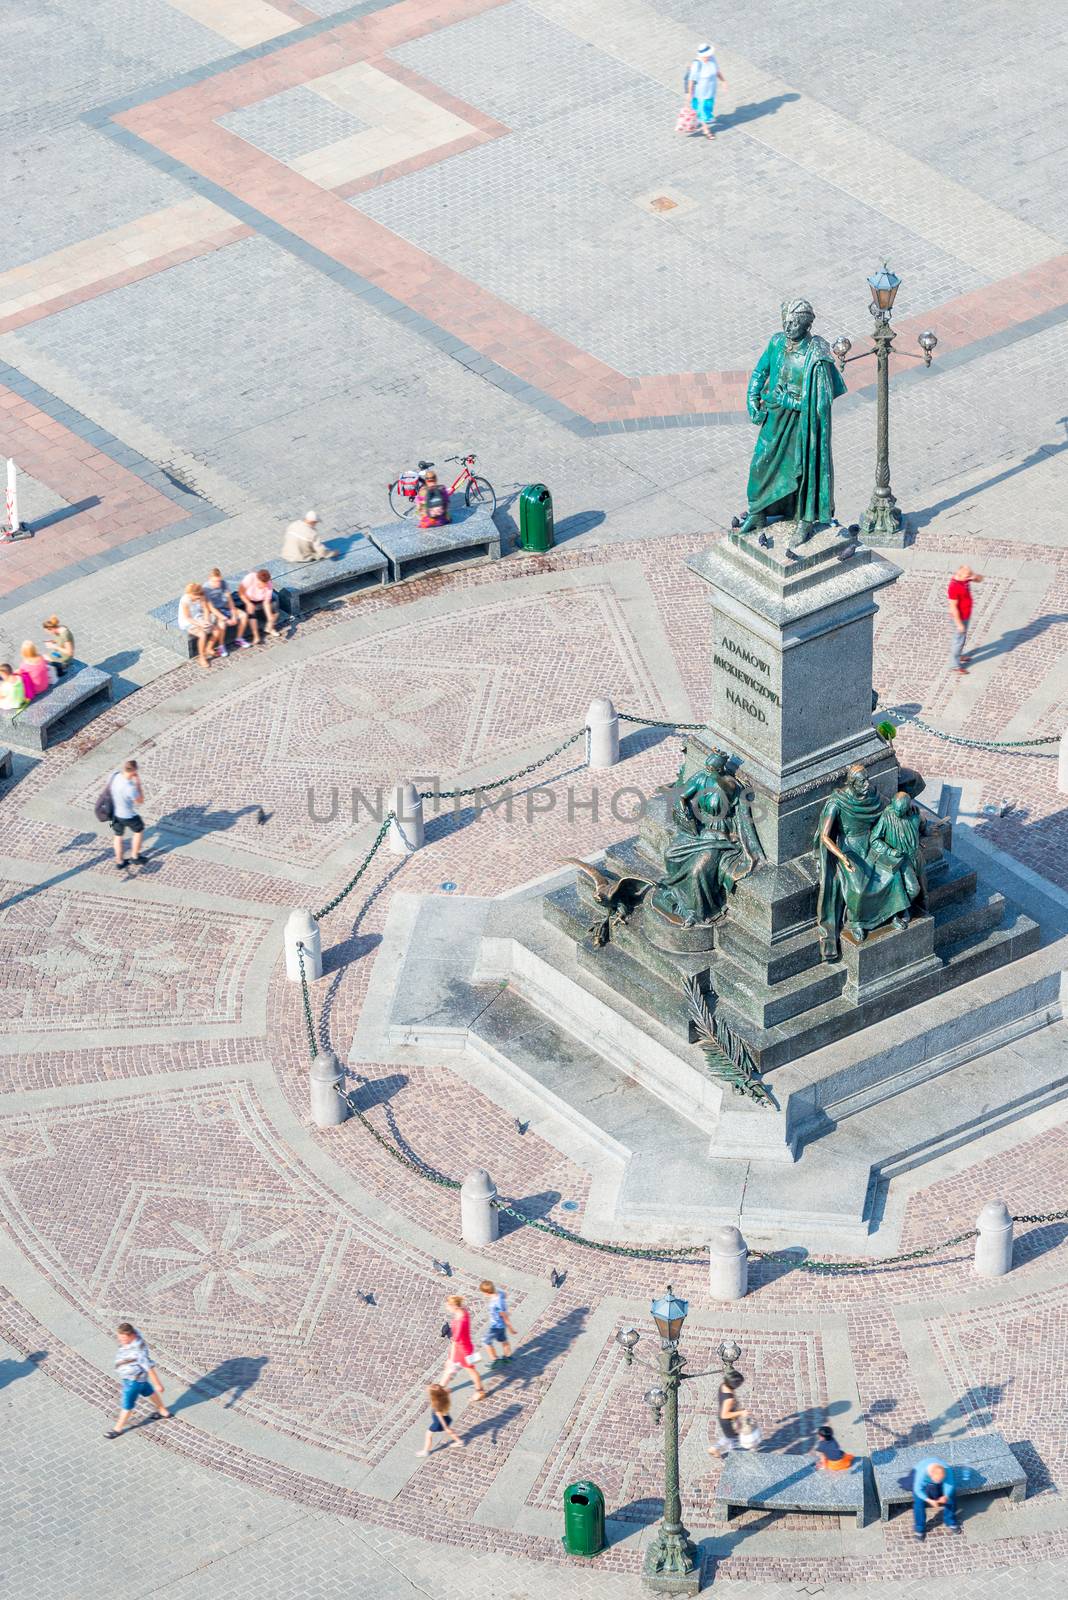 The famous monument to Polish poet Adam Mickiewicz on the main square of Krakow, Poland